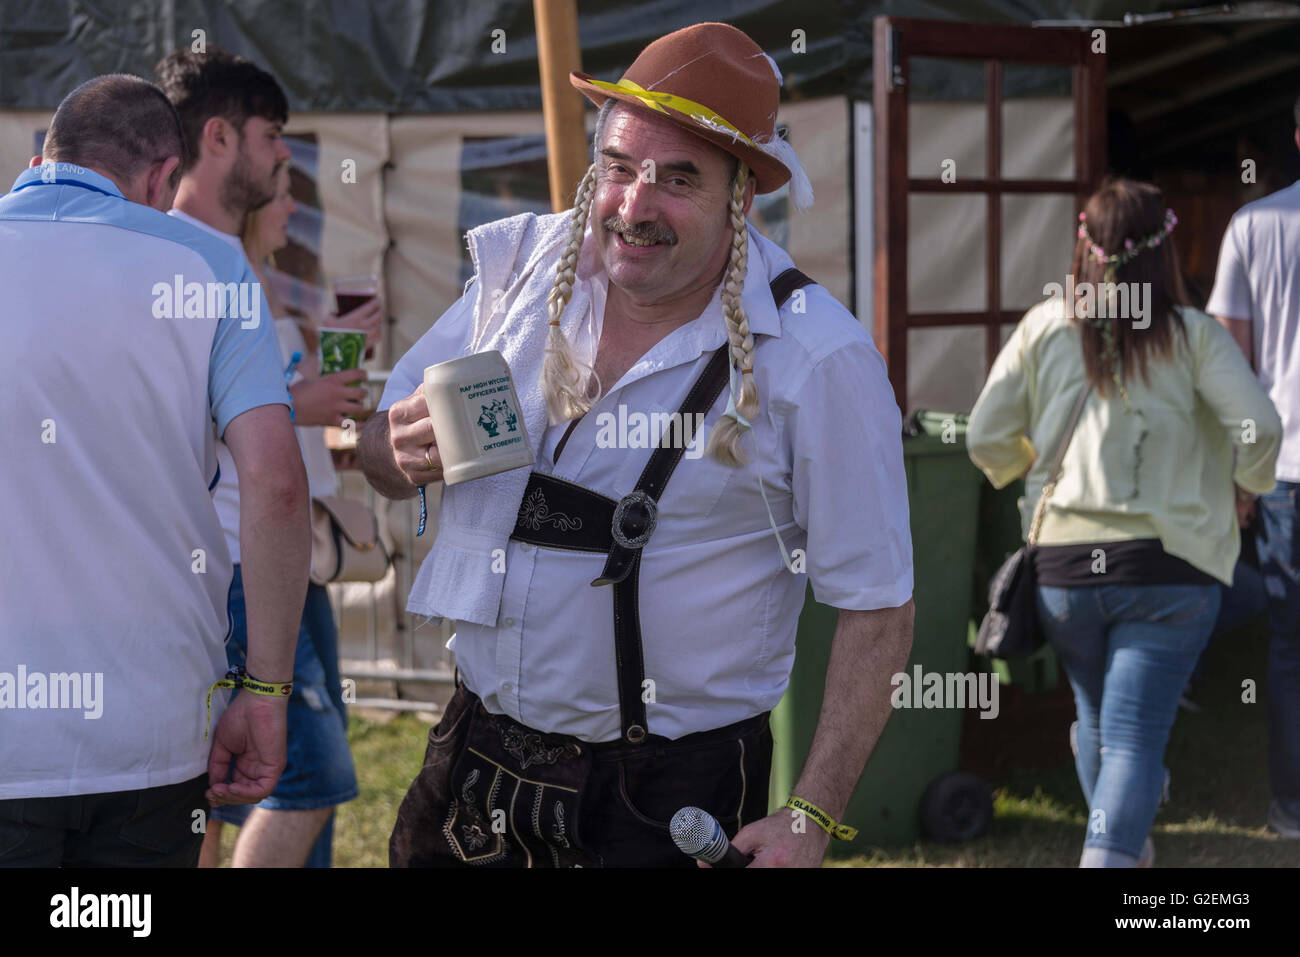 Christchurch, Dorset, UK. 29th May 2016. Bournemouth 7's Festival. Annual event at Bournemouth Sports Club.  Credit:  Gillian Downes/Alamy Live News. Stock Photo